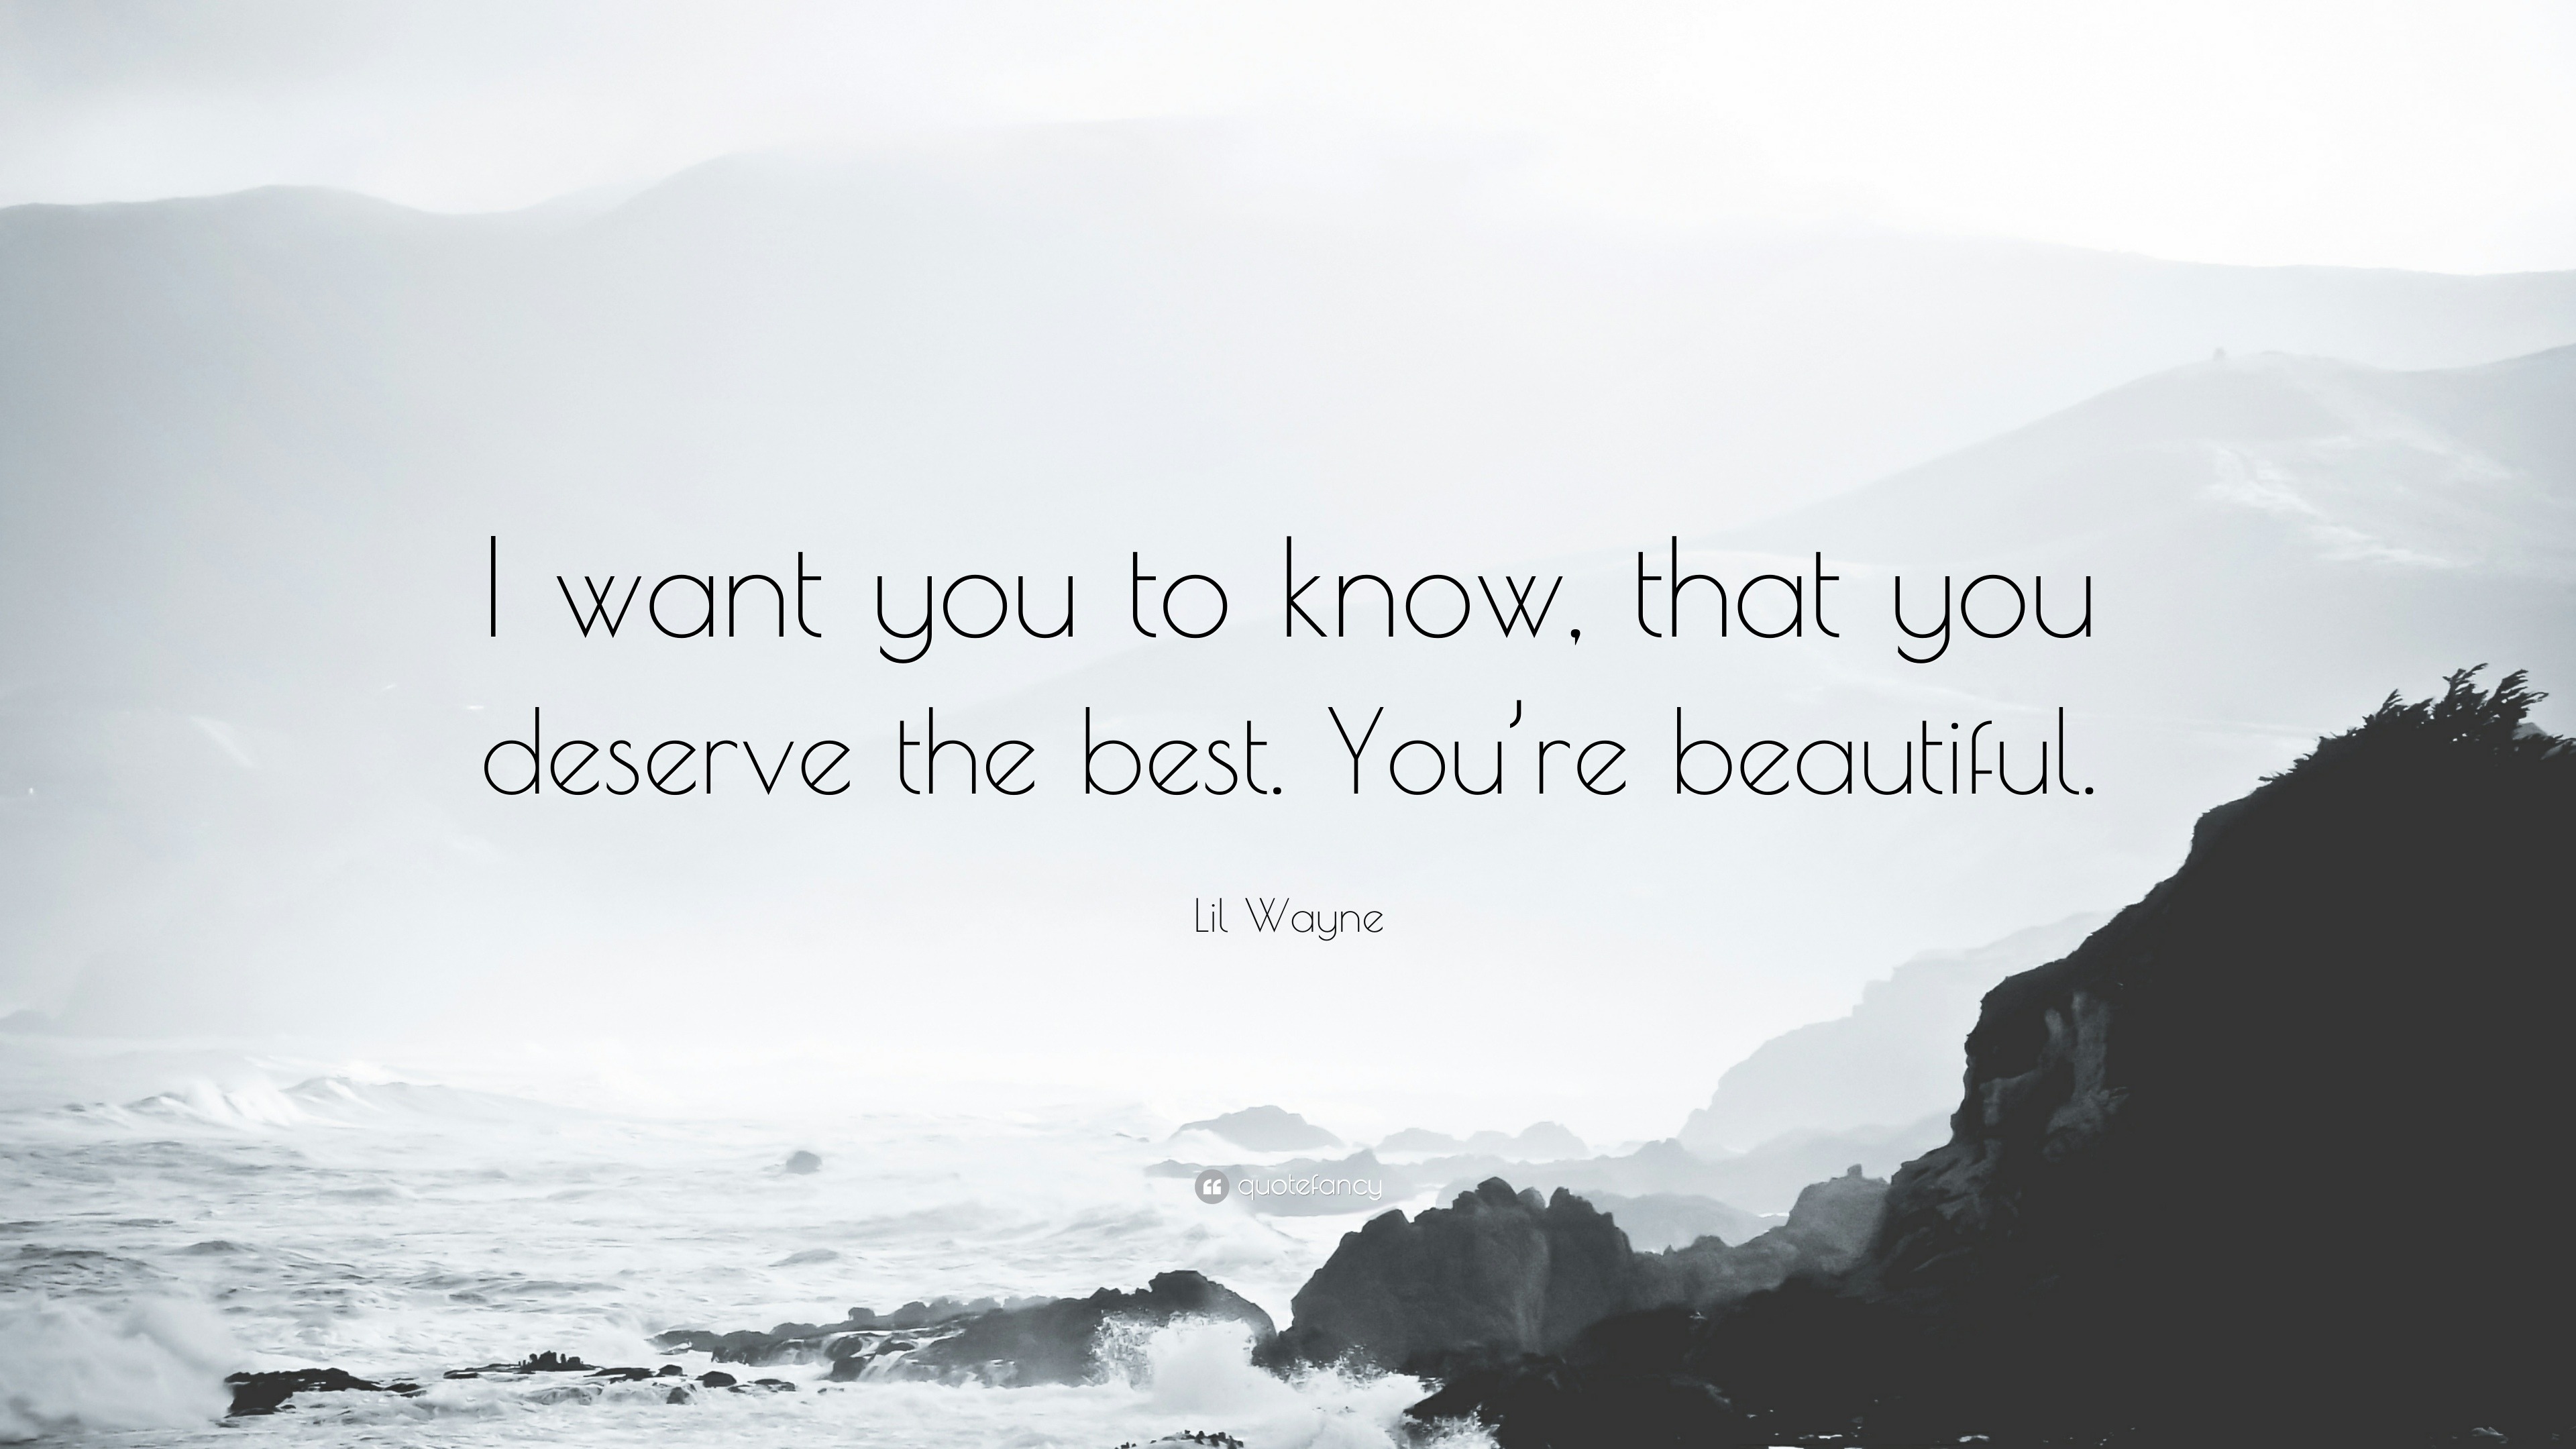 Lil Wayne Quote: “I Want You To Know, That You Deserve The Best. You're Beautiful.”